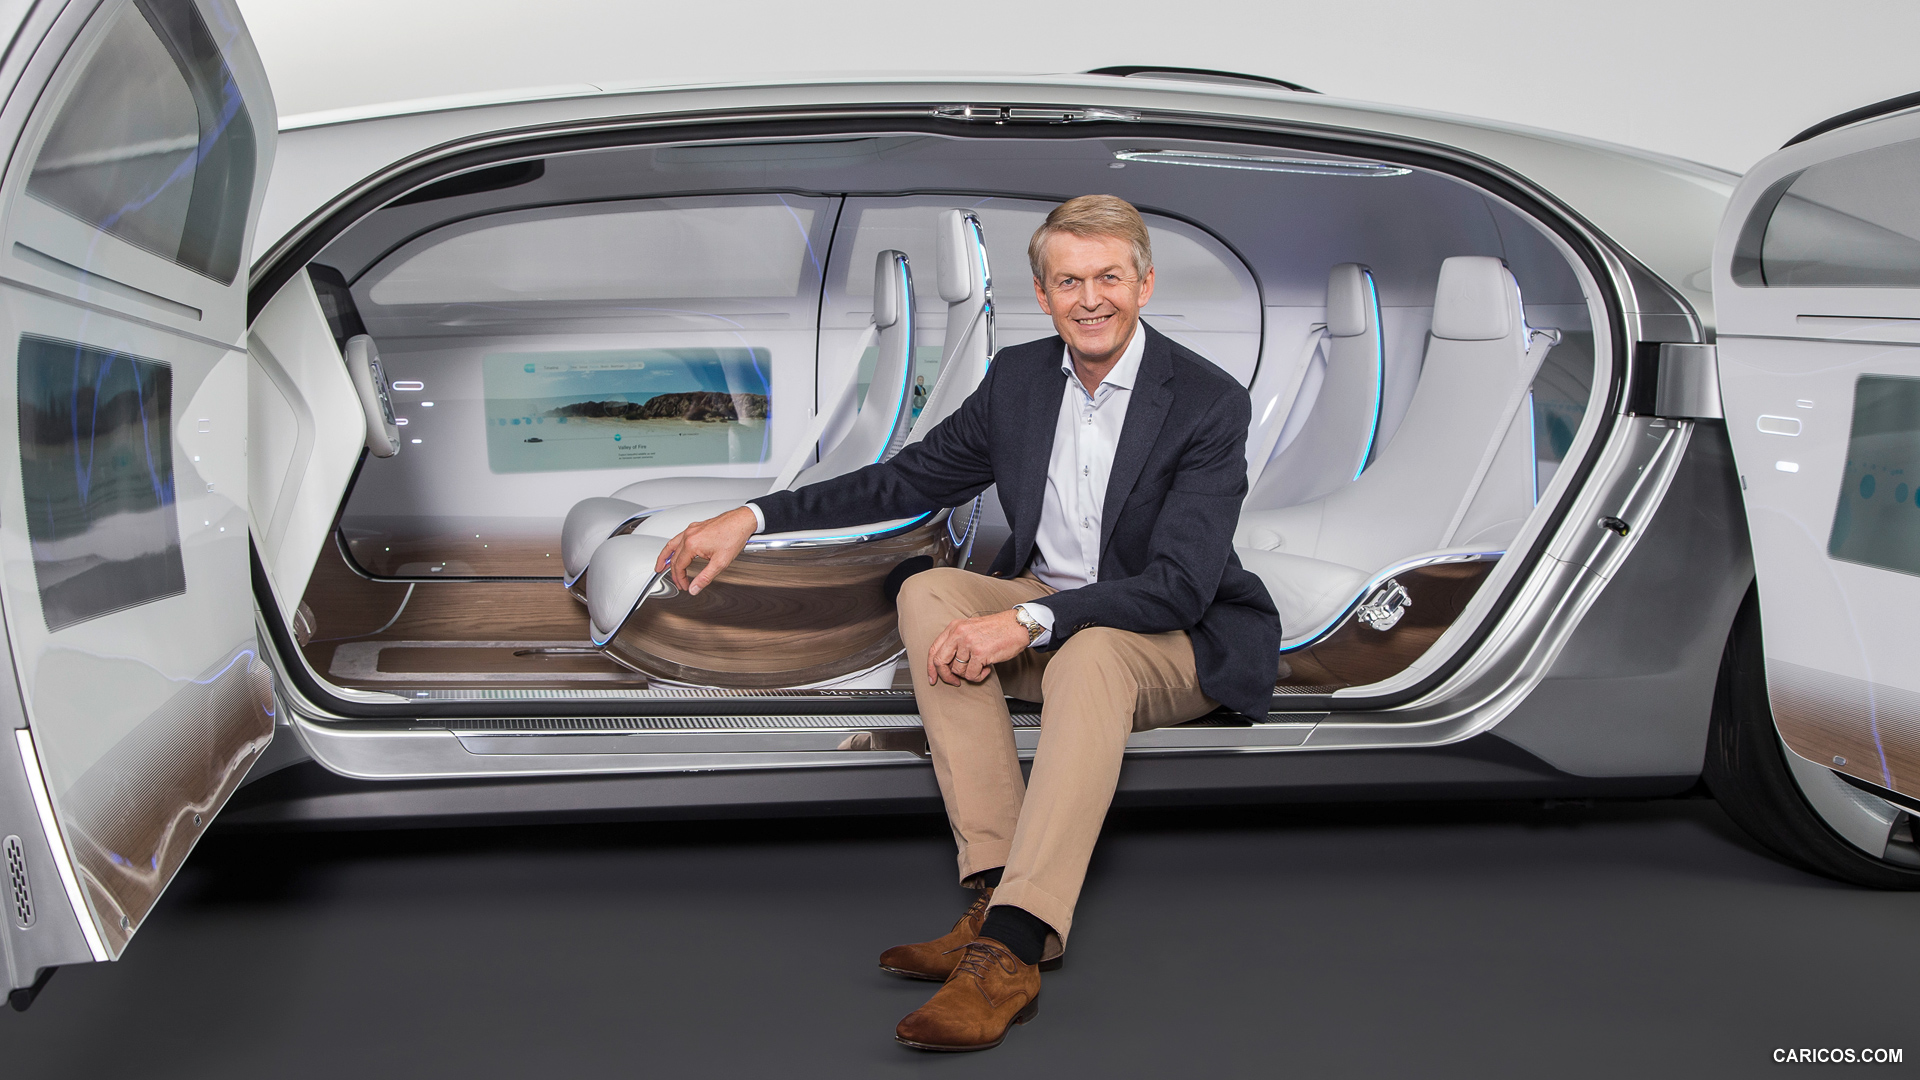 2015 Mercedes-Benz F 015 Luxury in Motion Concept  - Interior, #71 of 92